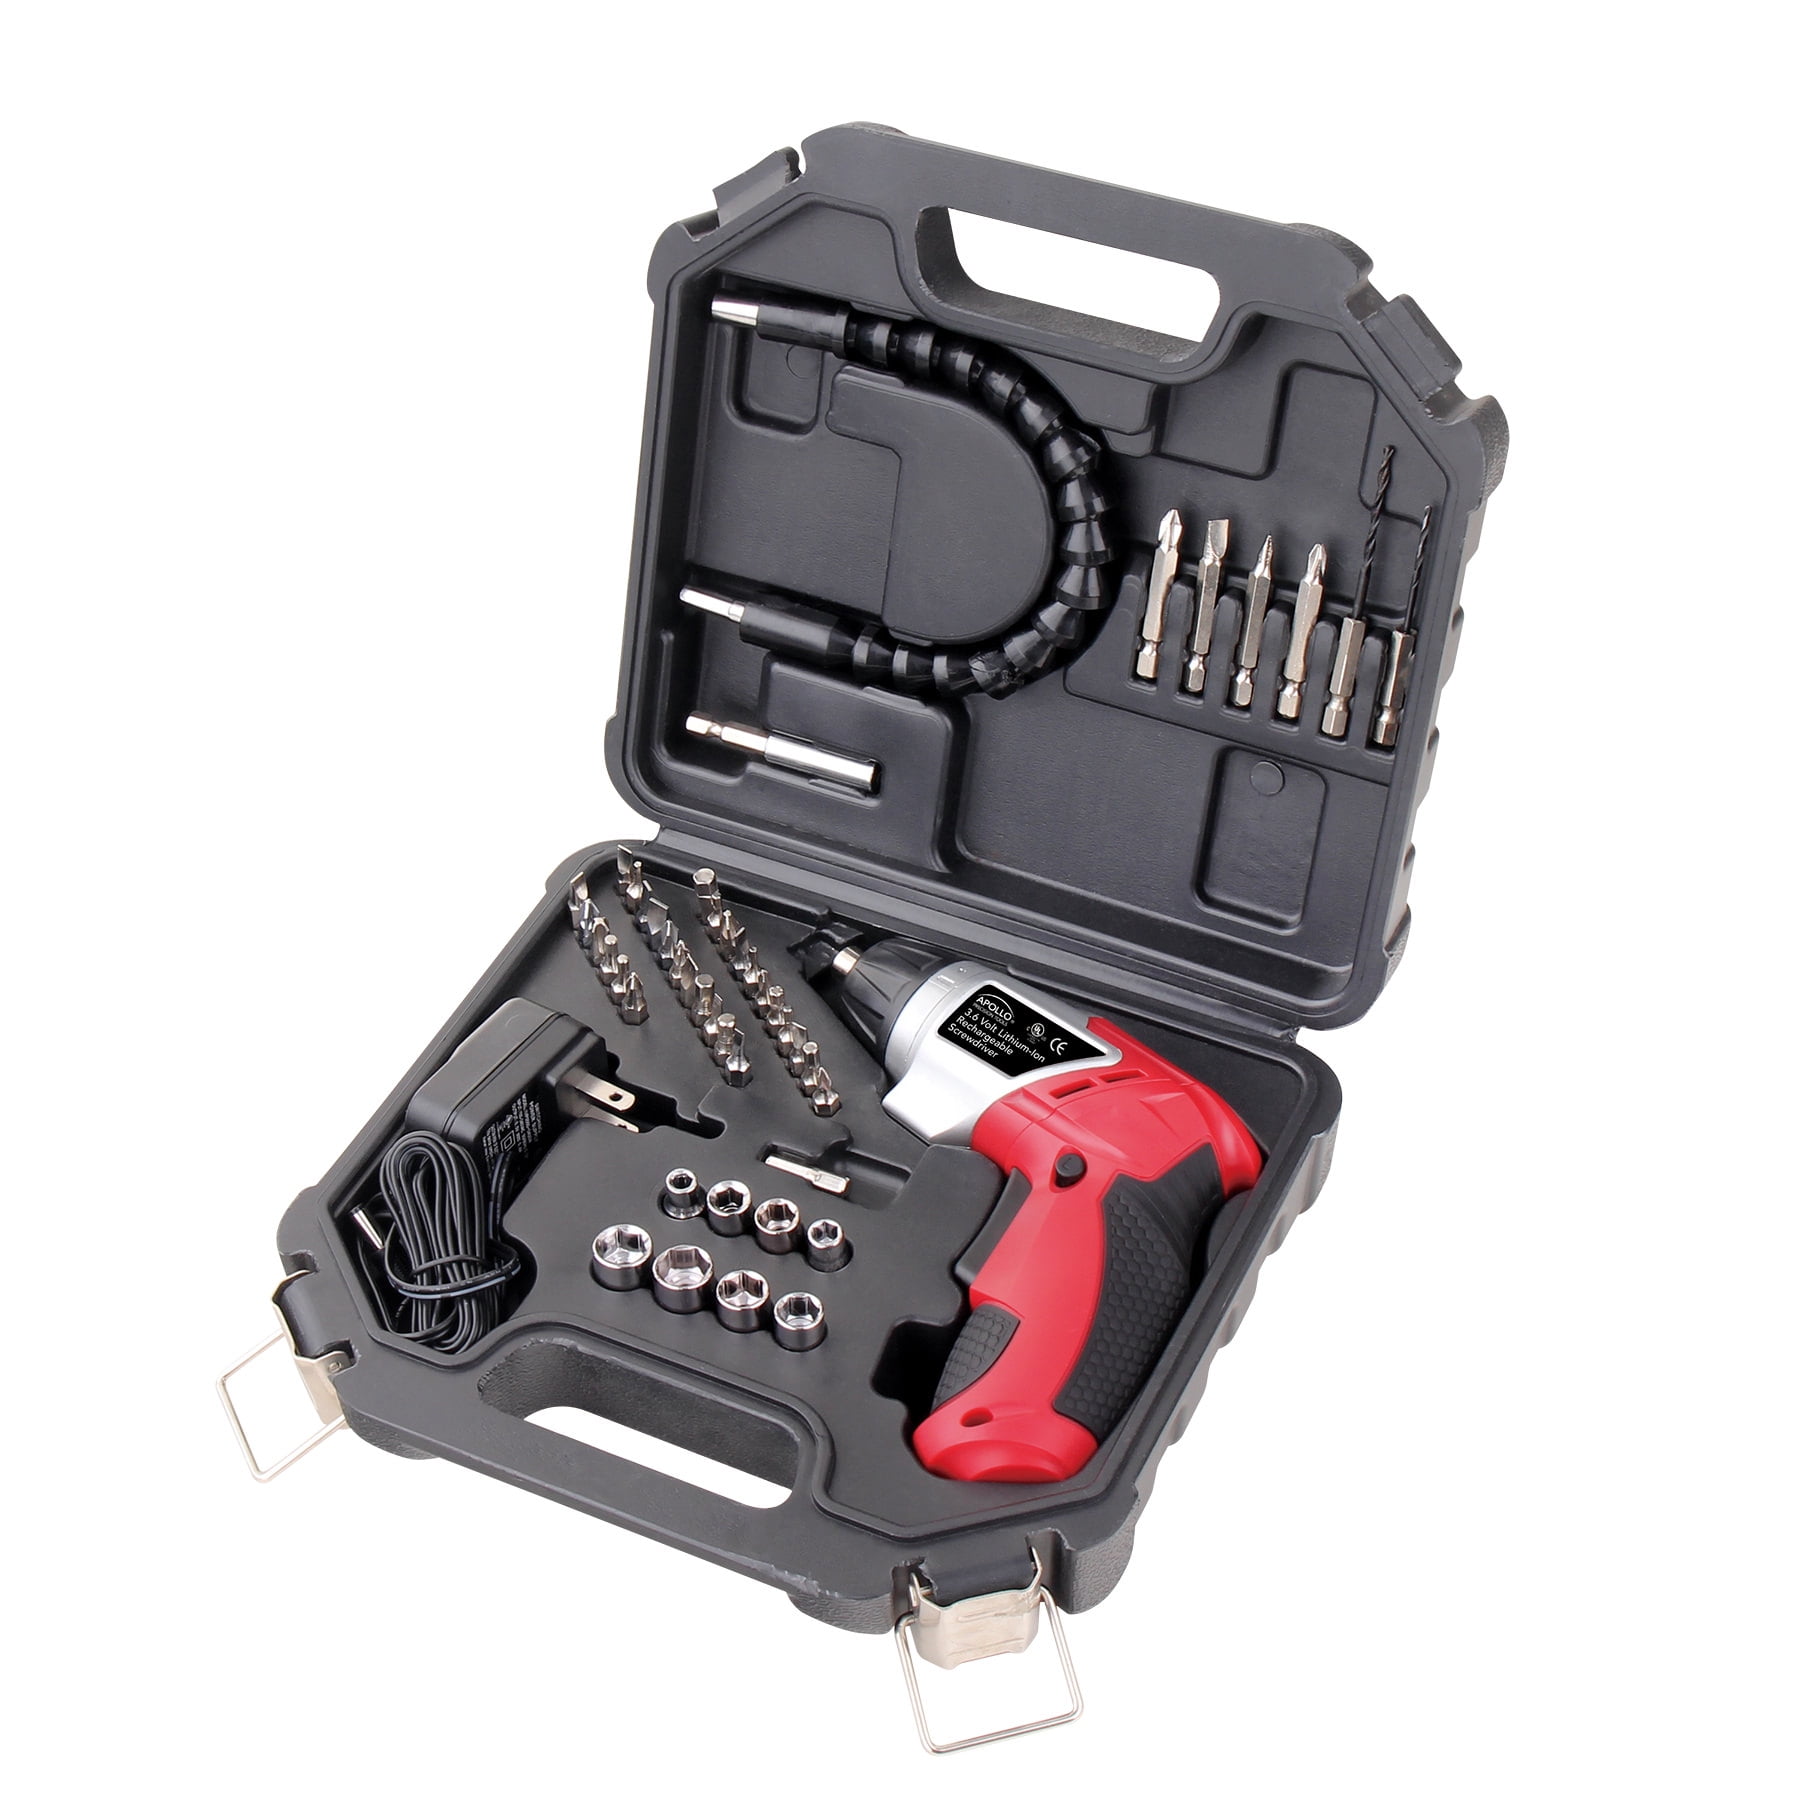 VIGRUE Cordless Screwdriver, Electric Screwdriver, Rechargeable 4V MAX  2000mAh Li-ion, with 45 Free Accessories, Battery